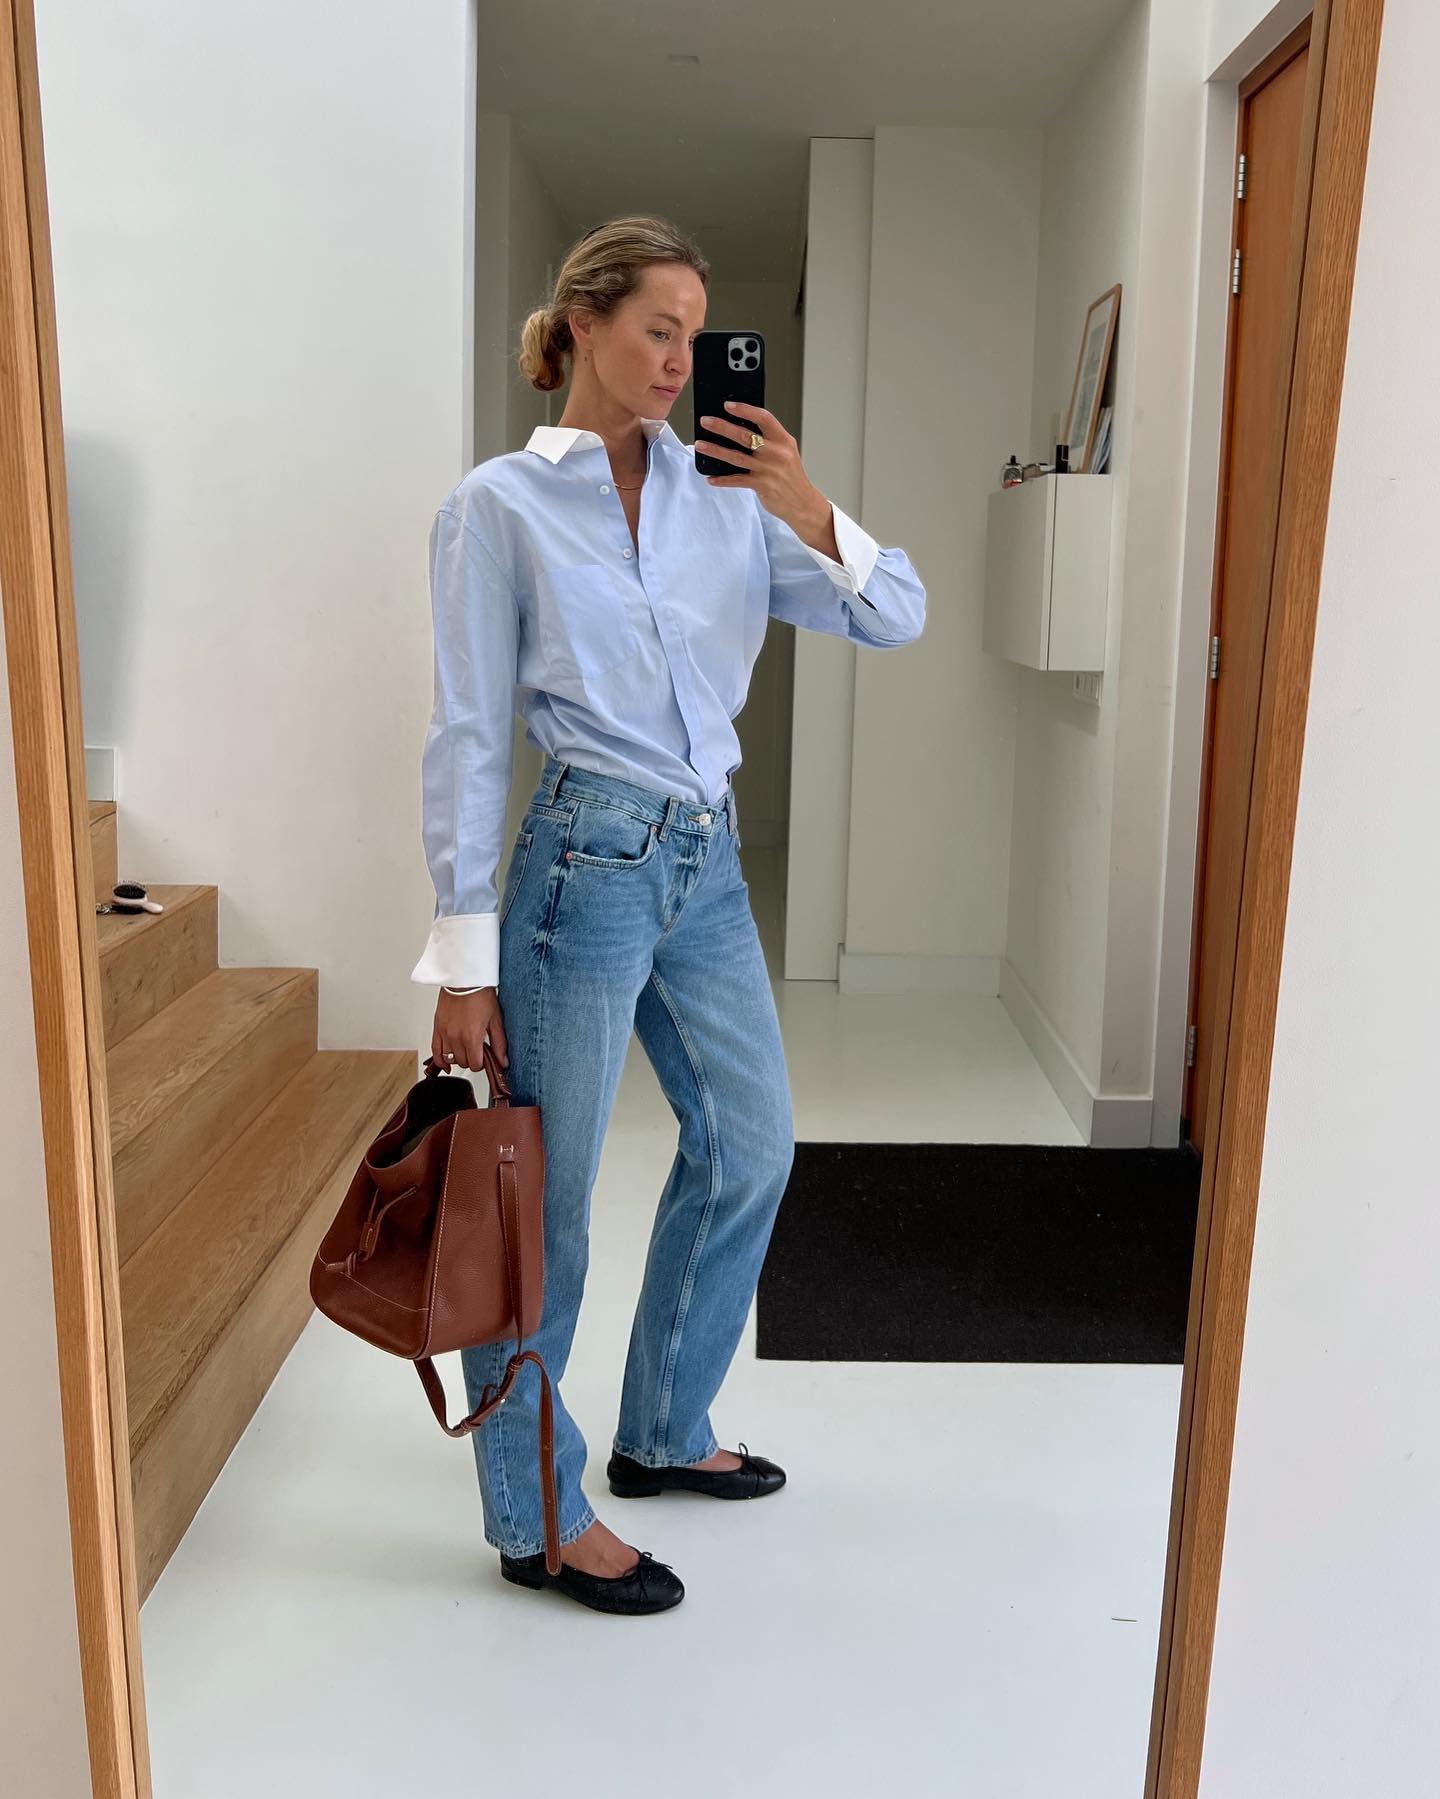 fashion influencer Anouk Yve poses for a mirror selfie wearing a blue button-down shirt with contrast collar and cuffs, jeans, and ballet flats